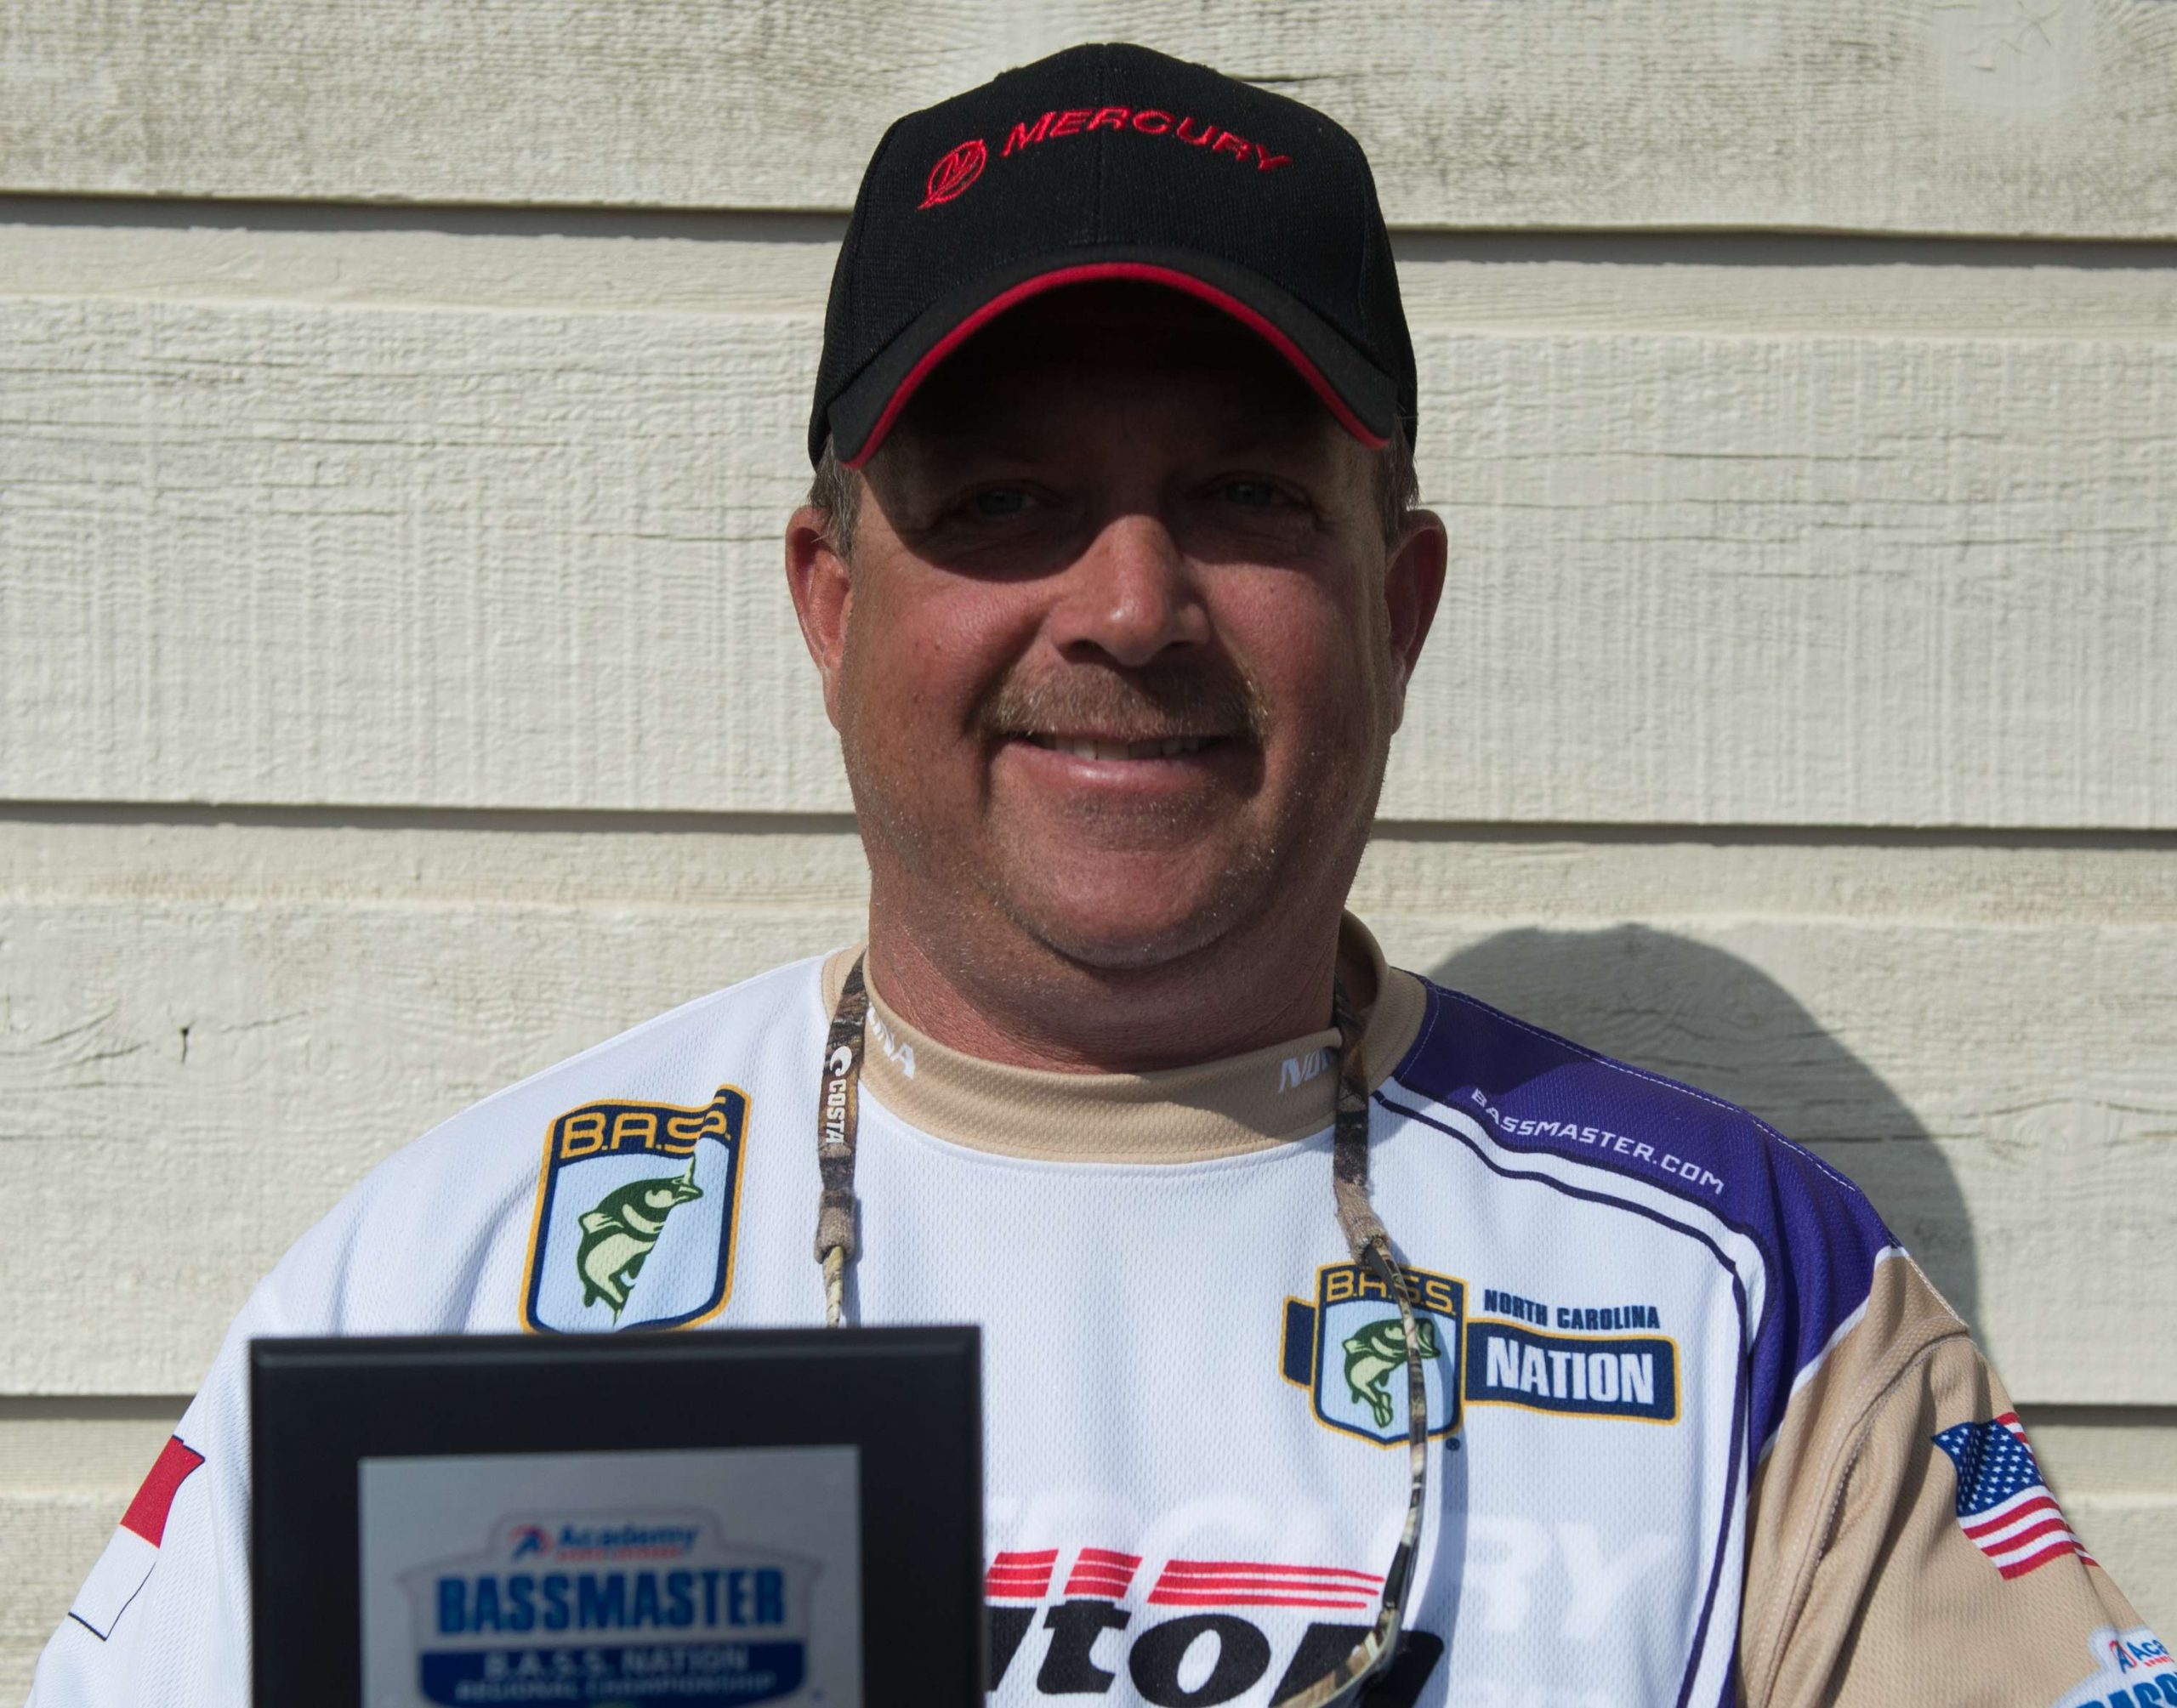 Rob Digh <br>
North Carolina Boater <br>
Rob Digh of the Outdoor Rush Bassmasters does double duty: He works in property management, and heâs also a big game outfitter. Heâs made it to the championship twice before. He likes camping, hunting and cooking. Dighâs sponsors include Triton Boats, Carolina Coach and Marine, Mercury Marine, Barry Sullivan Custom Lures, The Great Outdoors Cherryville, Shooter Lures, Izorline, Daiwa, Cashion Rods, DCC Construction, Brookwood Restaurant and Linebergers Steak House. He also thanks his family â Hope, Aaron and Anna â for their sponsorship. 